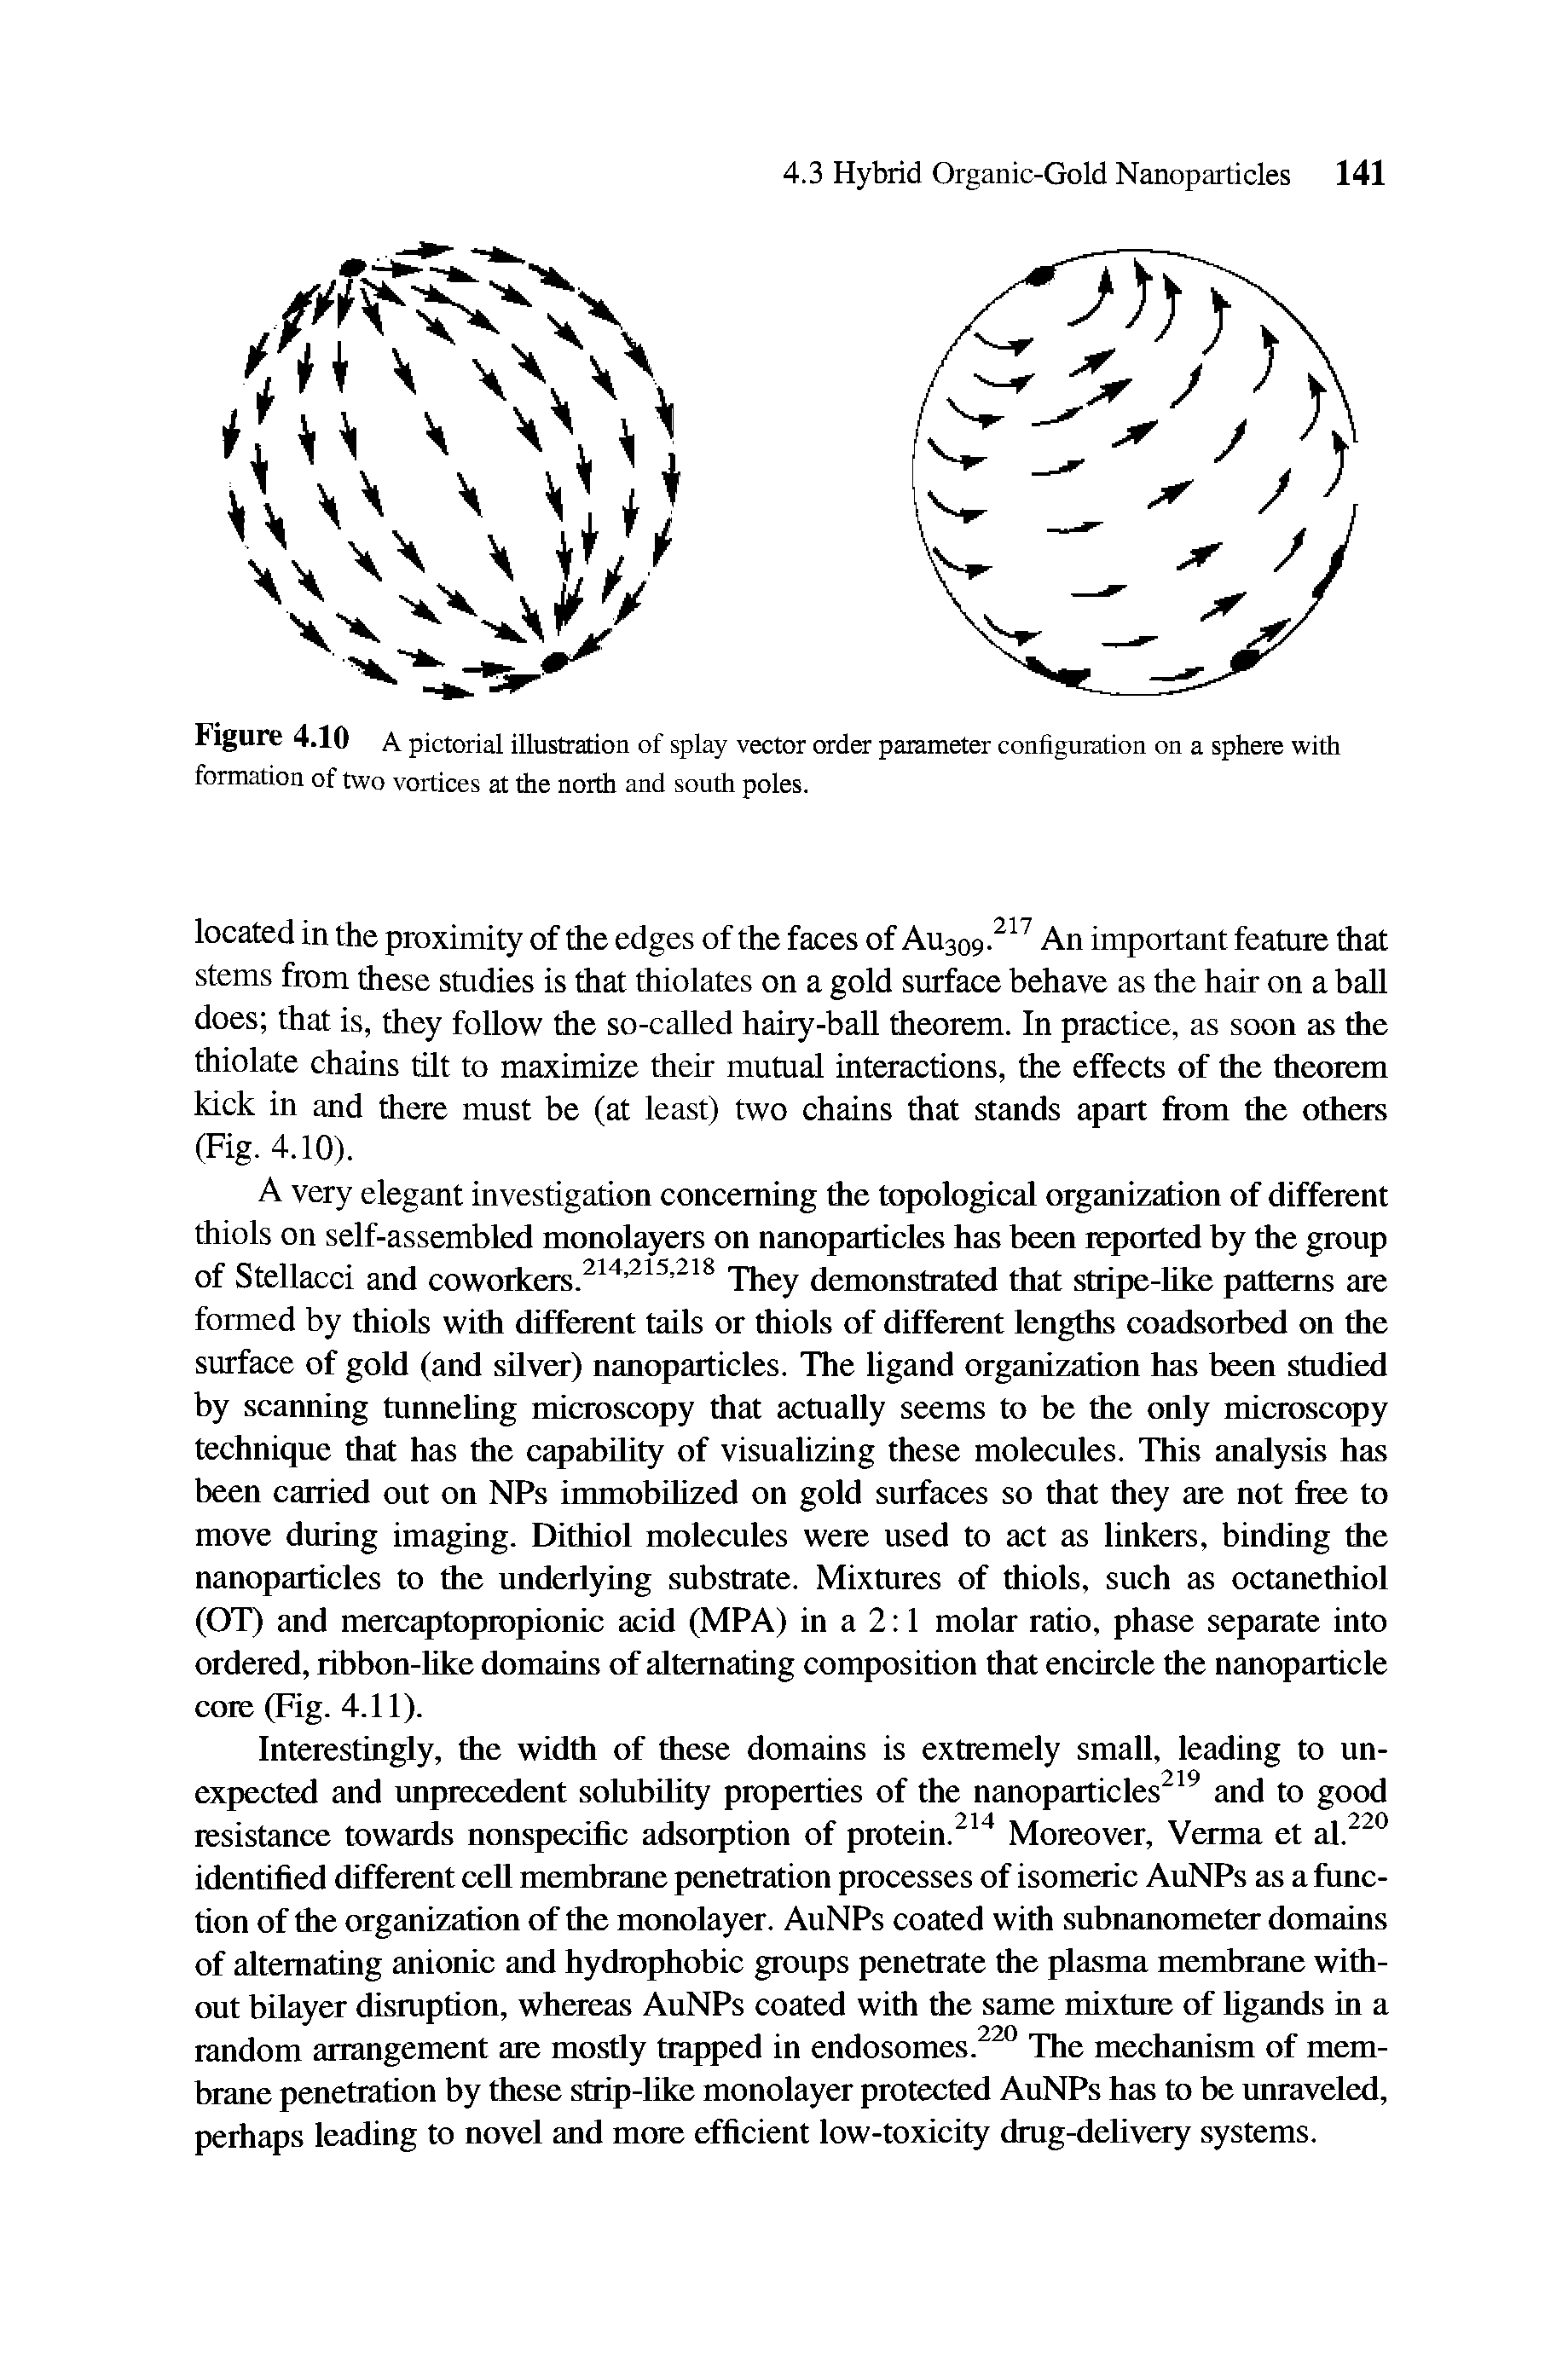 Figure 4.10 A pictorial illustration of splay vector order parameter configuration on a sphere with formation of two vortices at the north and south poles.